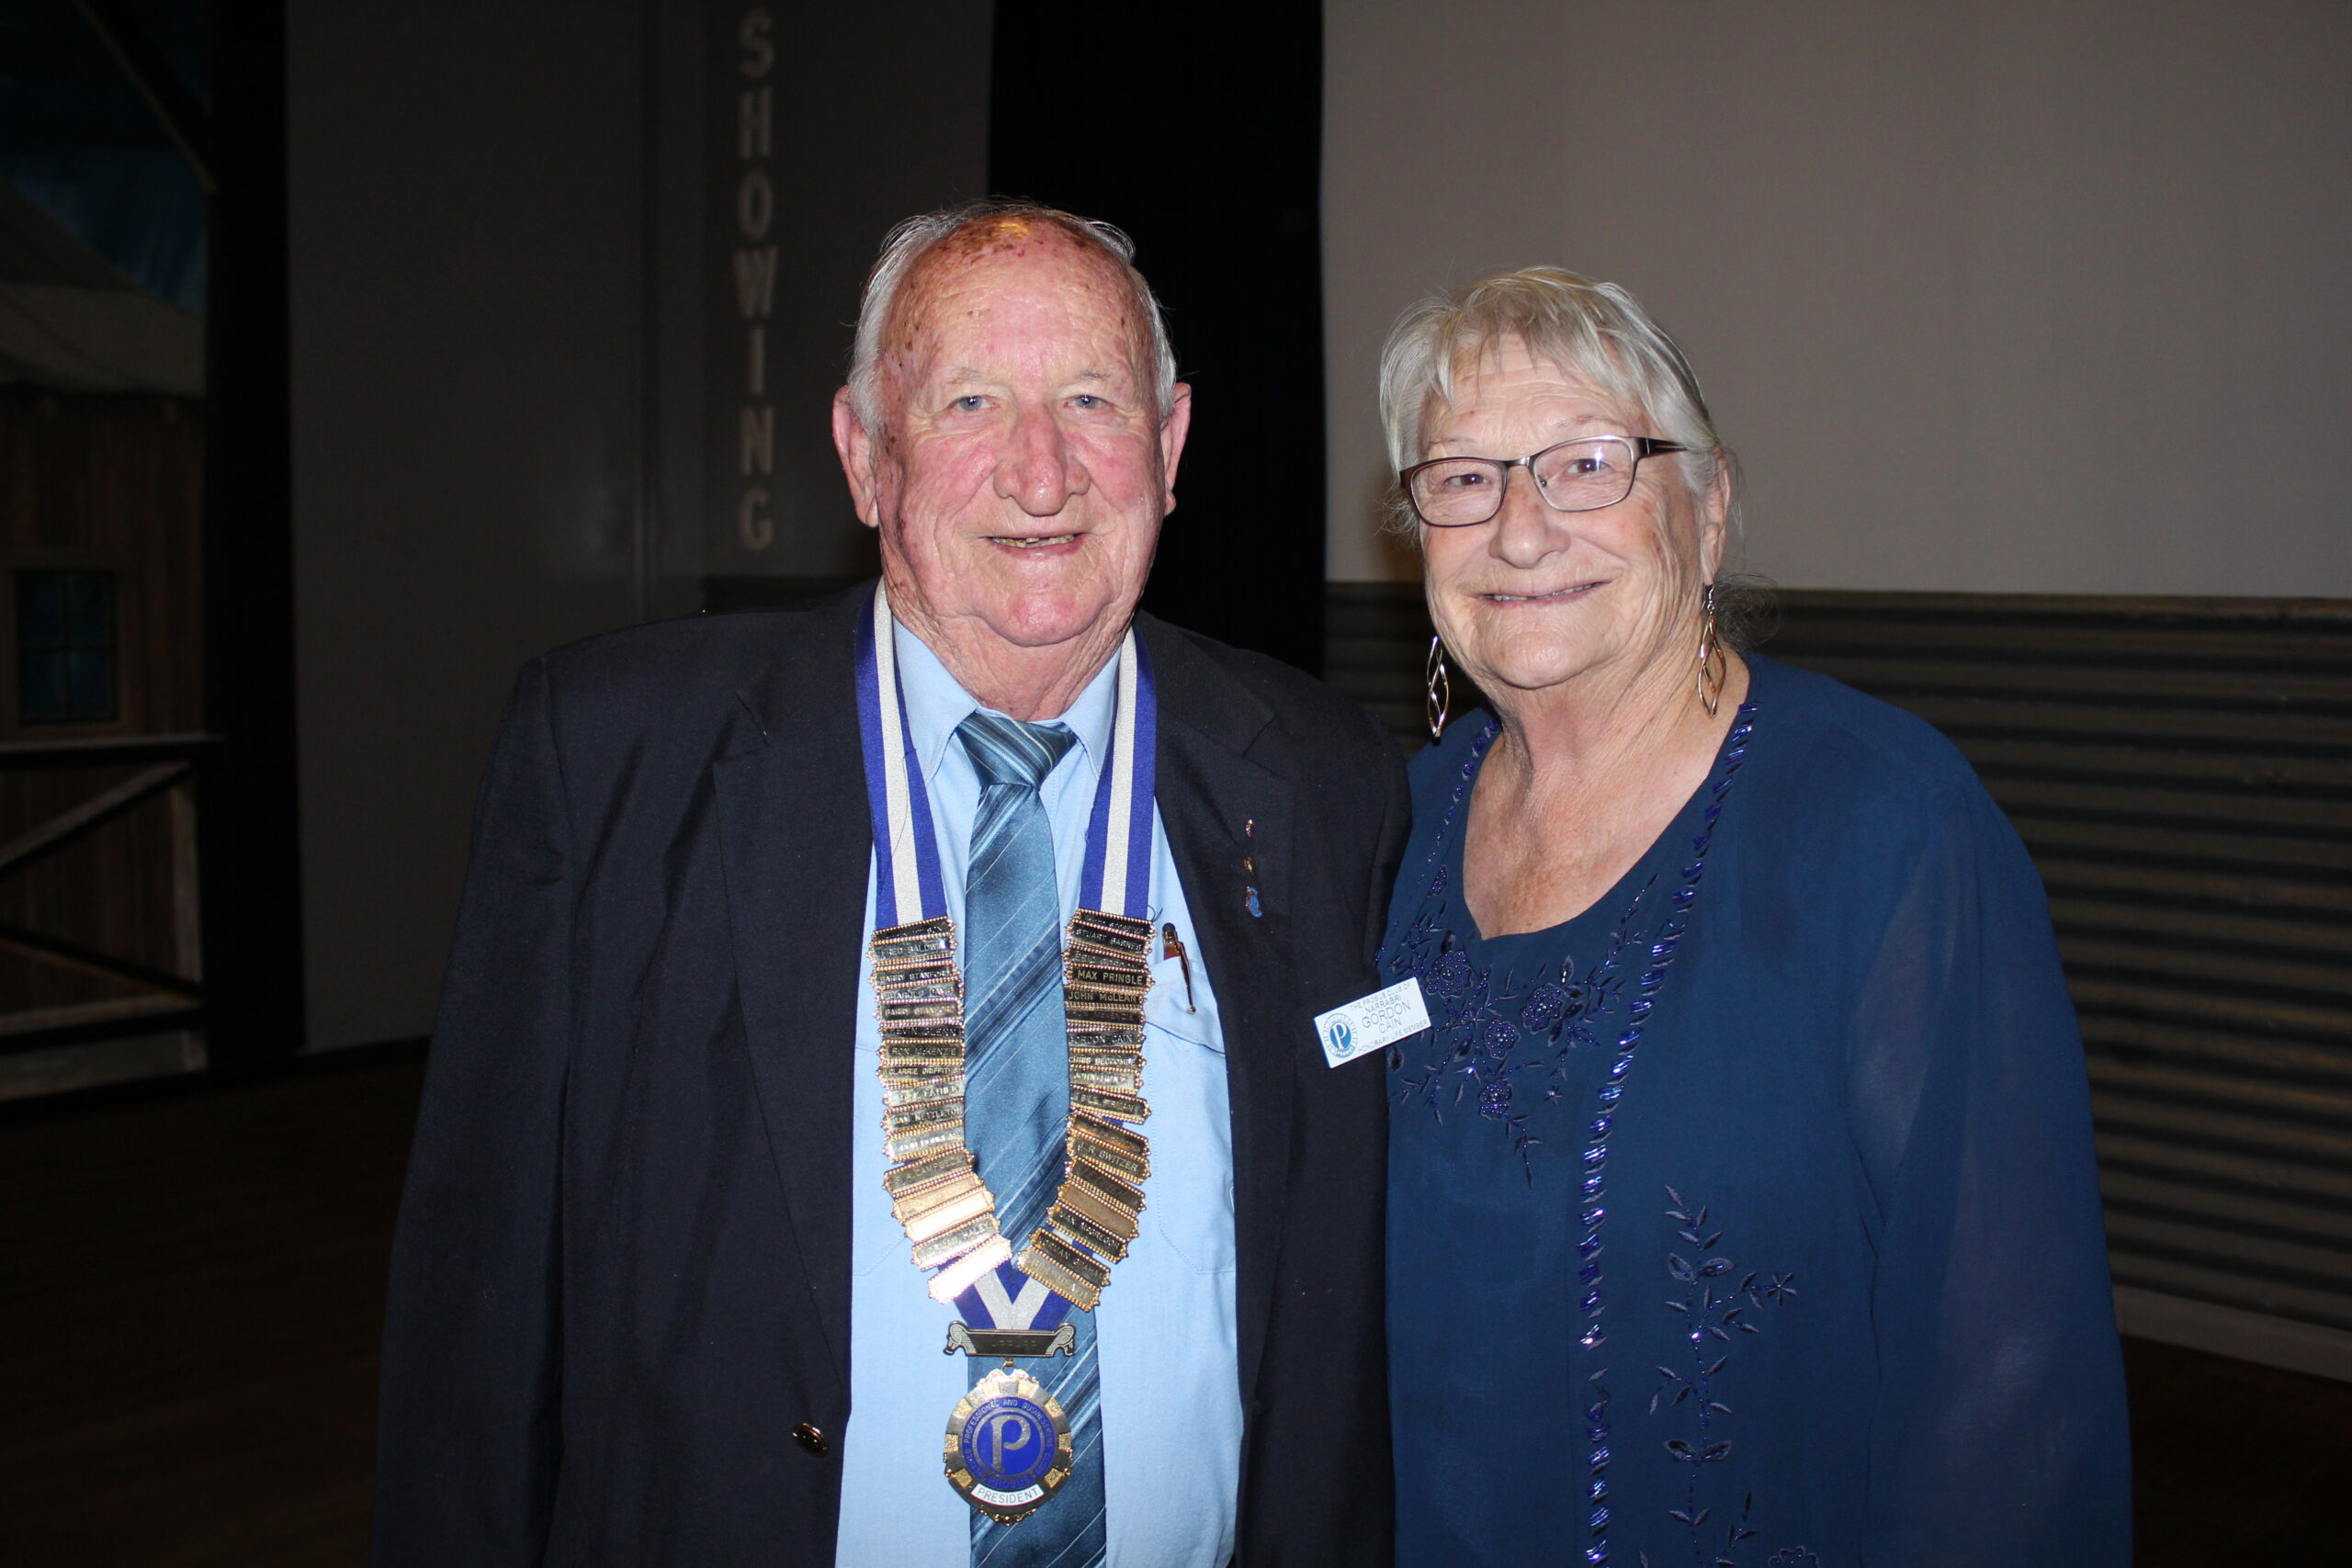 Twice as nice: Gordon named Probus president for second time